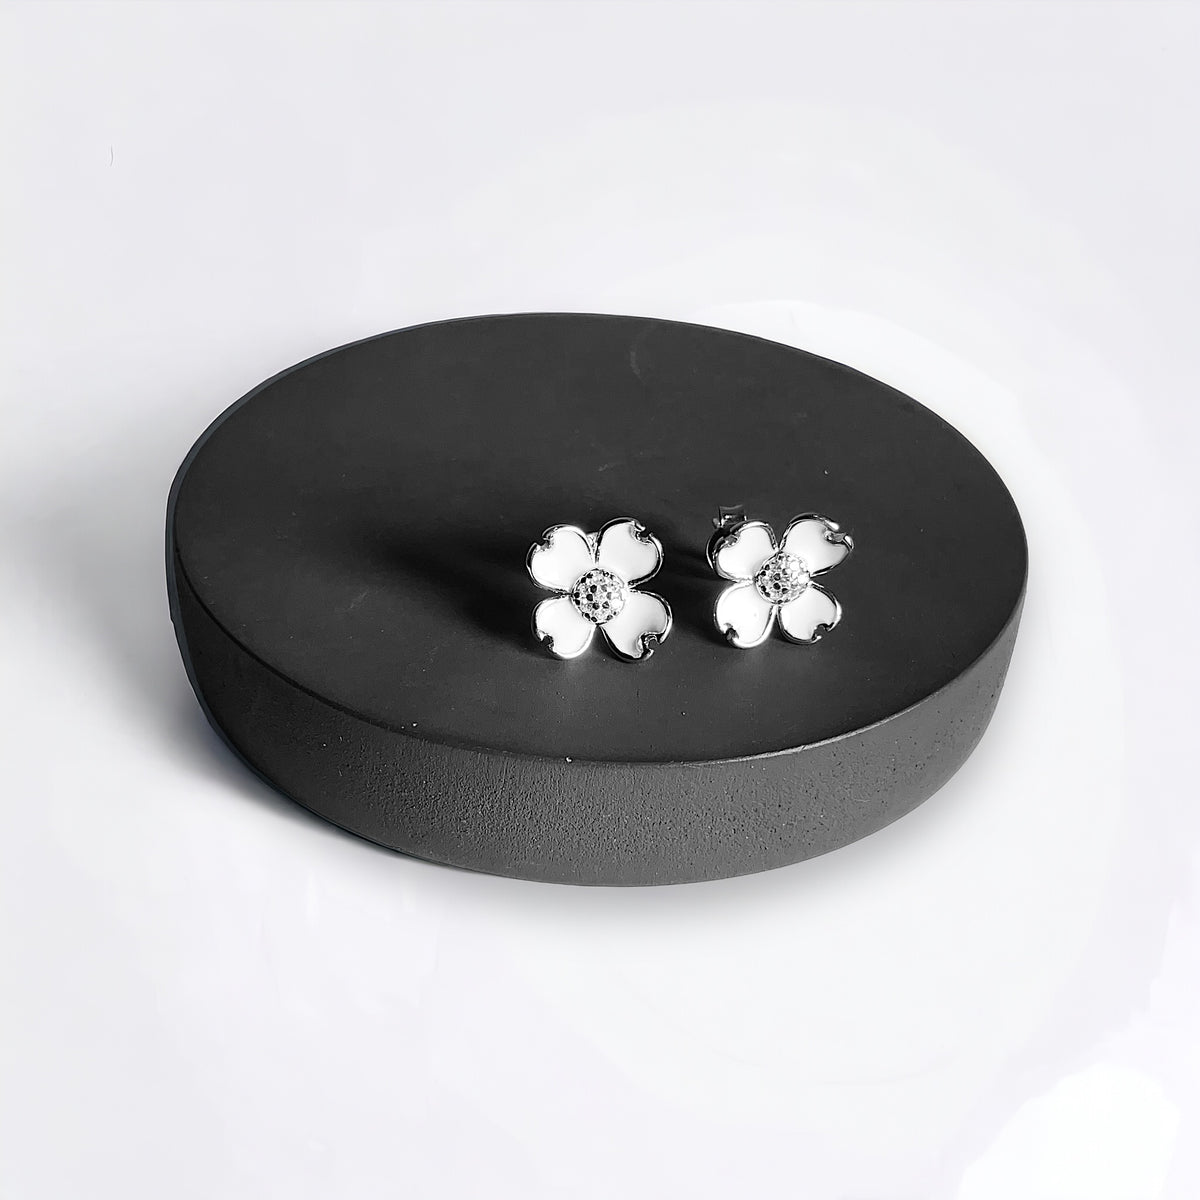 a pair of white flowers sitting on top of a black plate